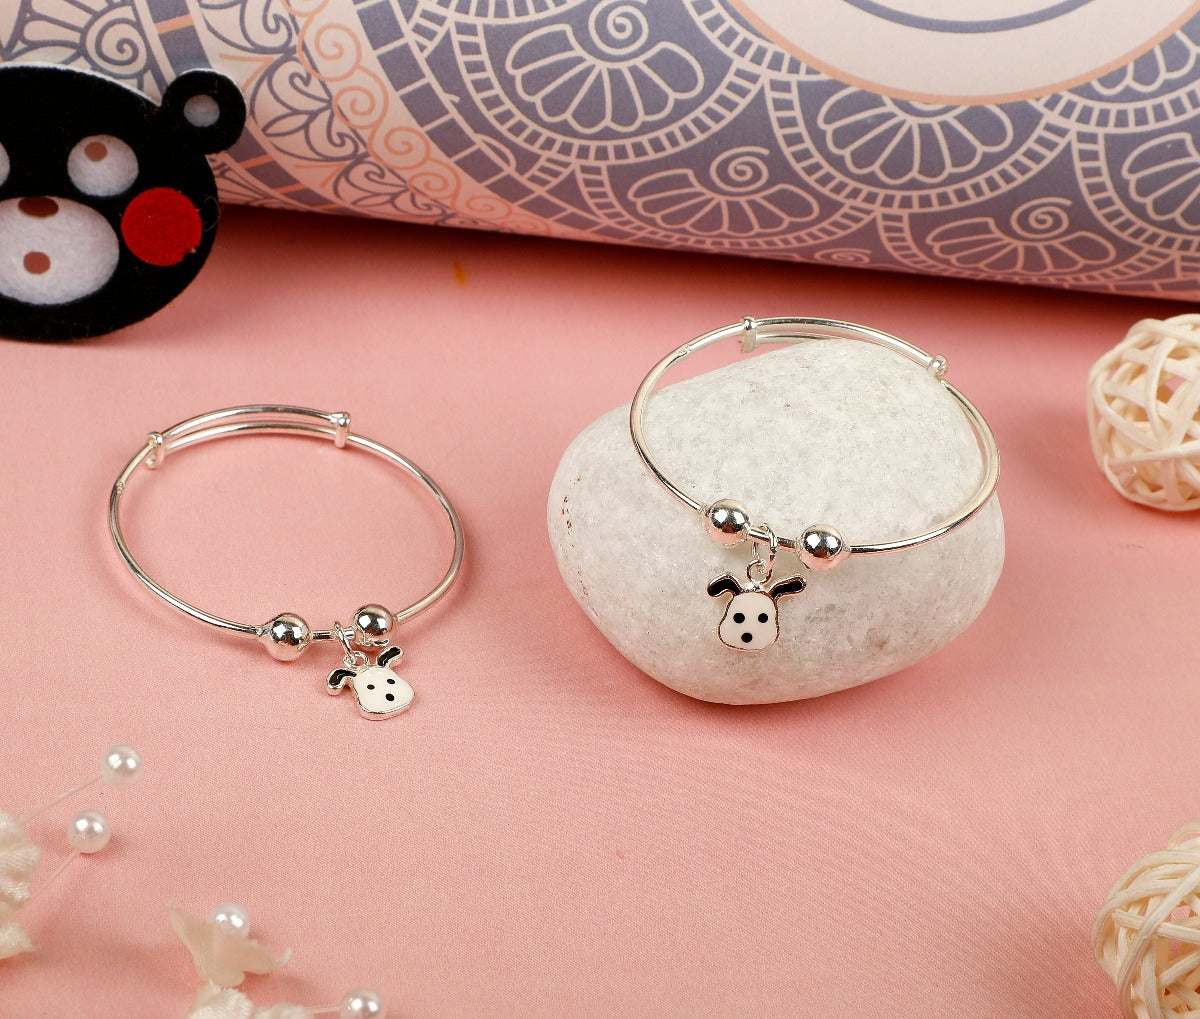 Welcome your little one to the world with our White Puppy Charms Baby Bangles. Crafted with Sterling Silver, these bangles feature a silver finish and a charming puppy charm with an enamel finish. Designed for comfortable wear for your baby. Show off your little one's style with these adorable bangles.